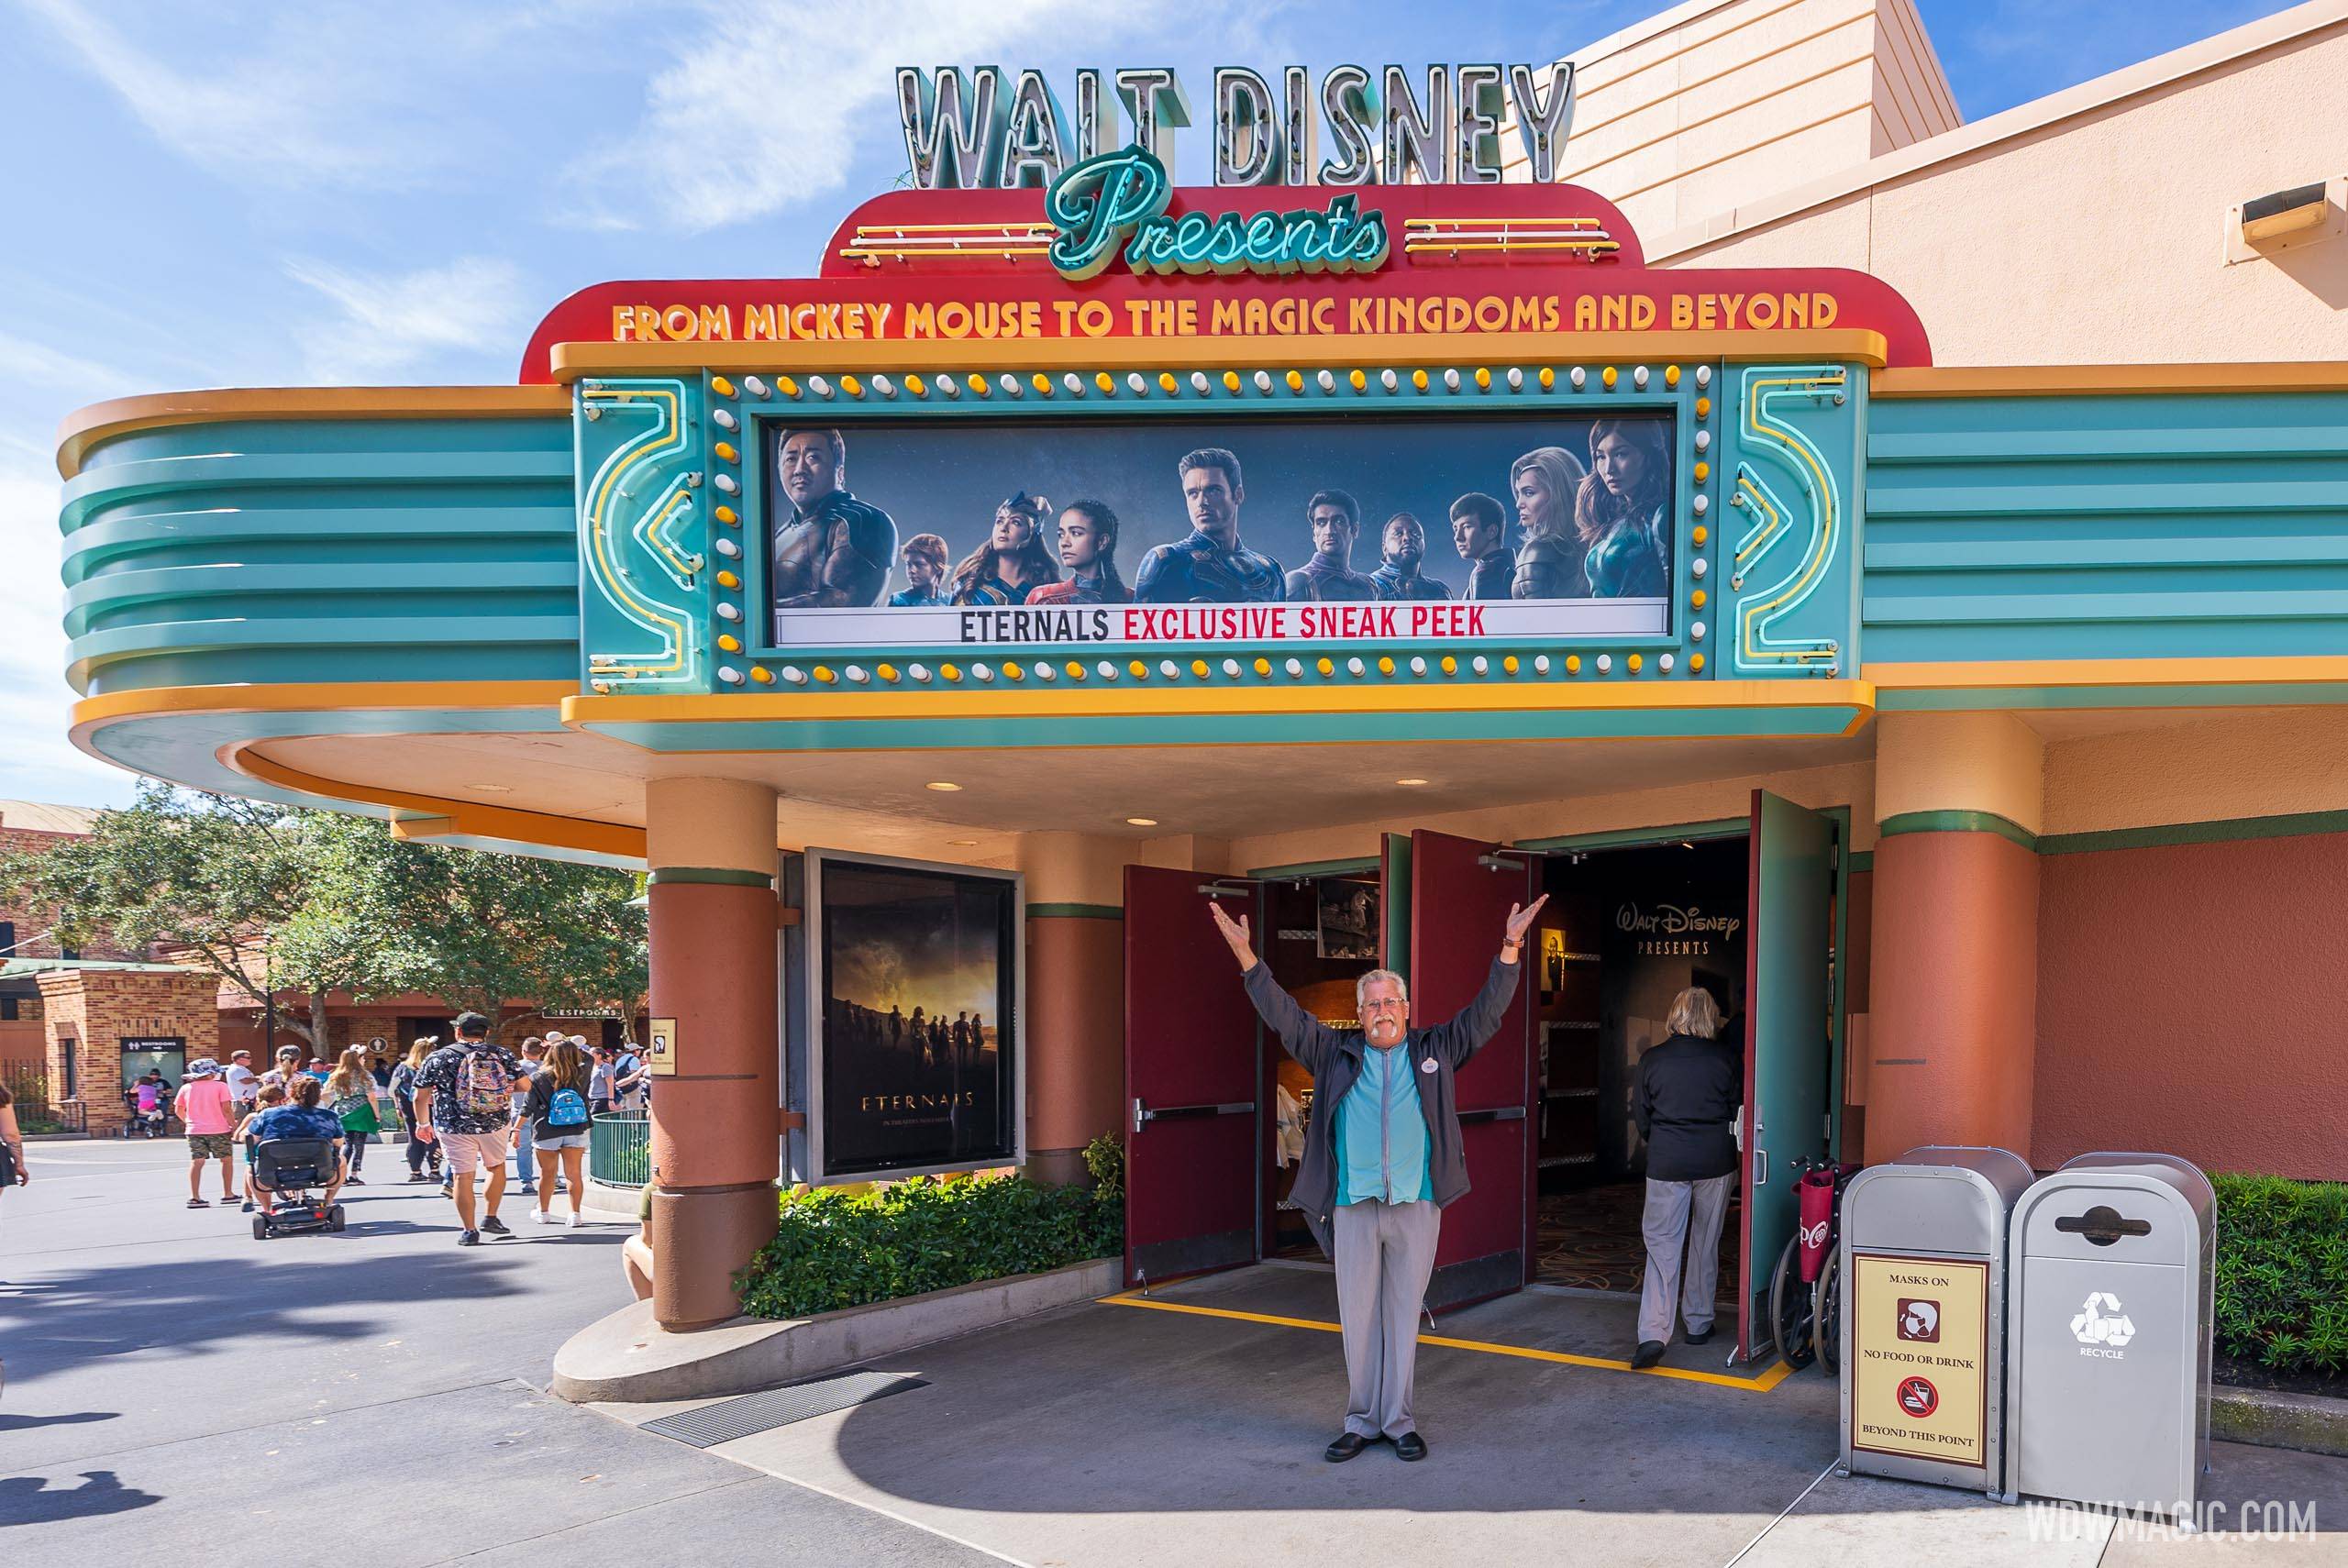 Press Release - Walt Disney - One Mans Dream Brings Guests Up Close and Personal With Entertainment Heritage